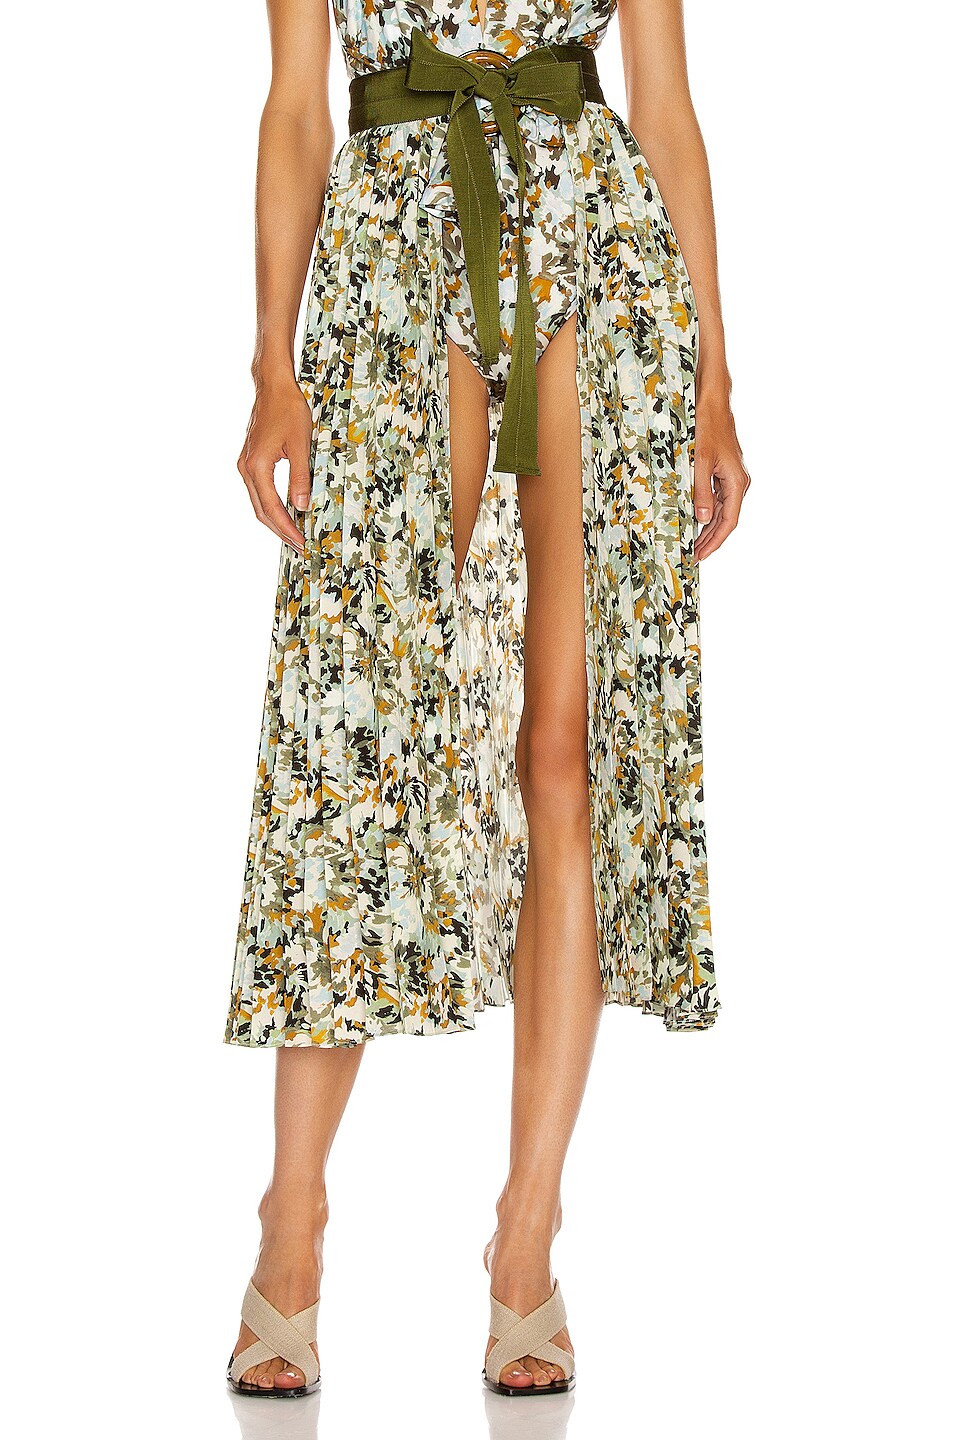 Image 1 of SILVIA TCHERASSI Blanche Skirt Pareo in Camouflage